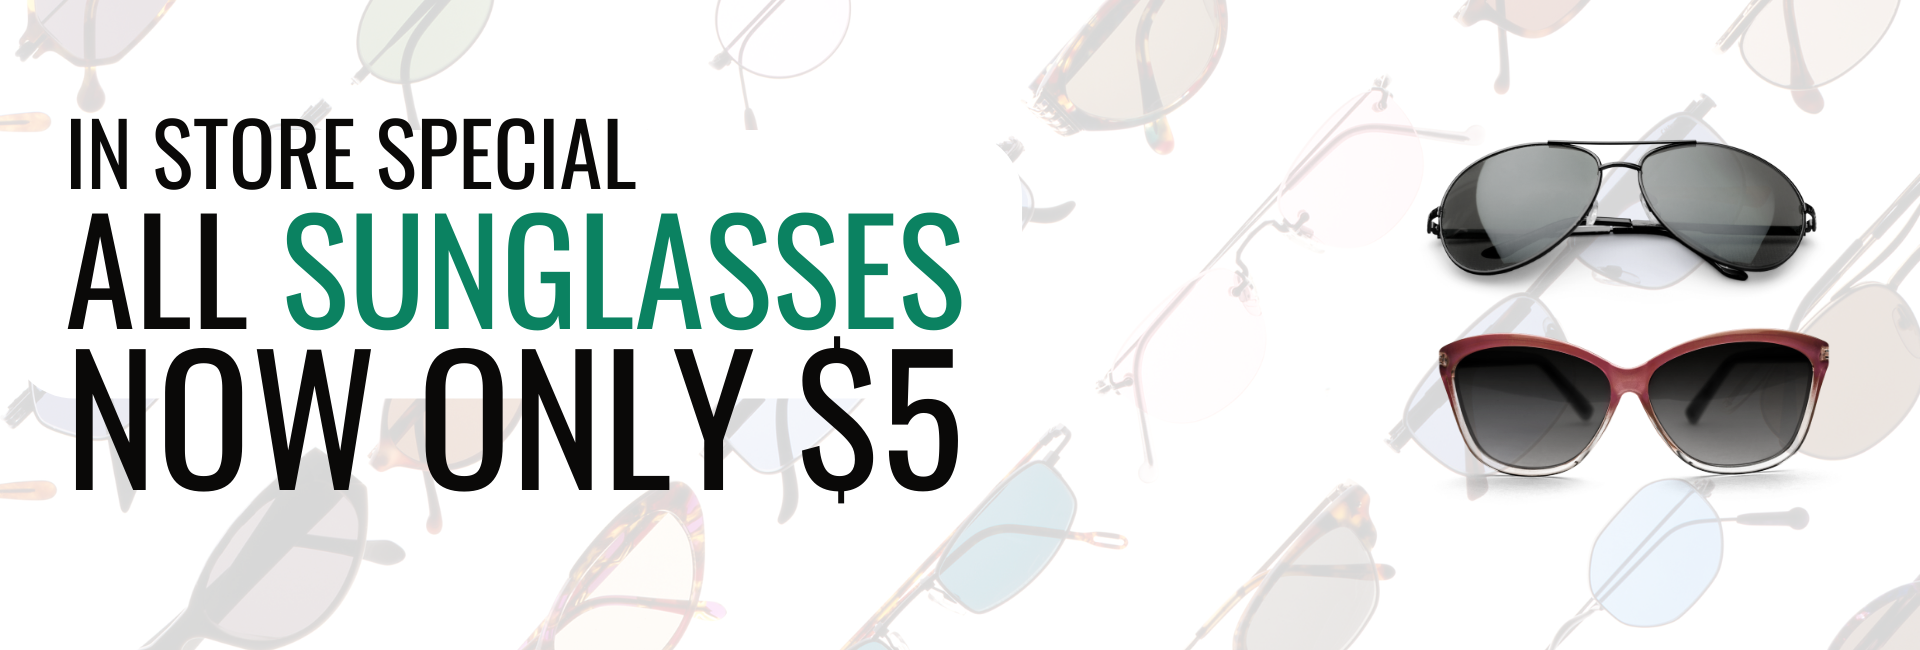 in store special all sunglasses now only $5